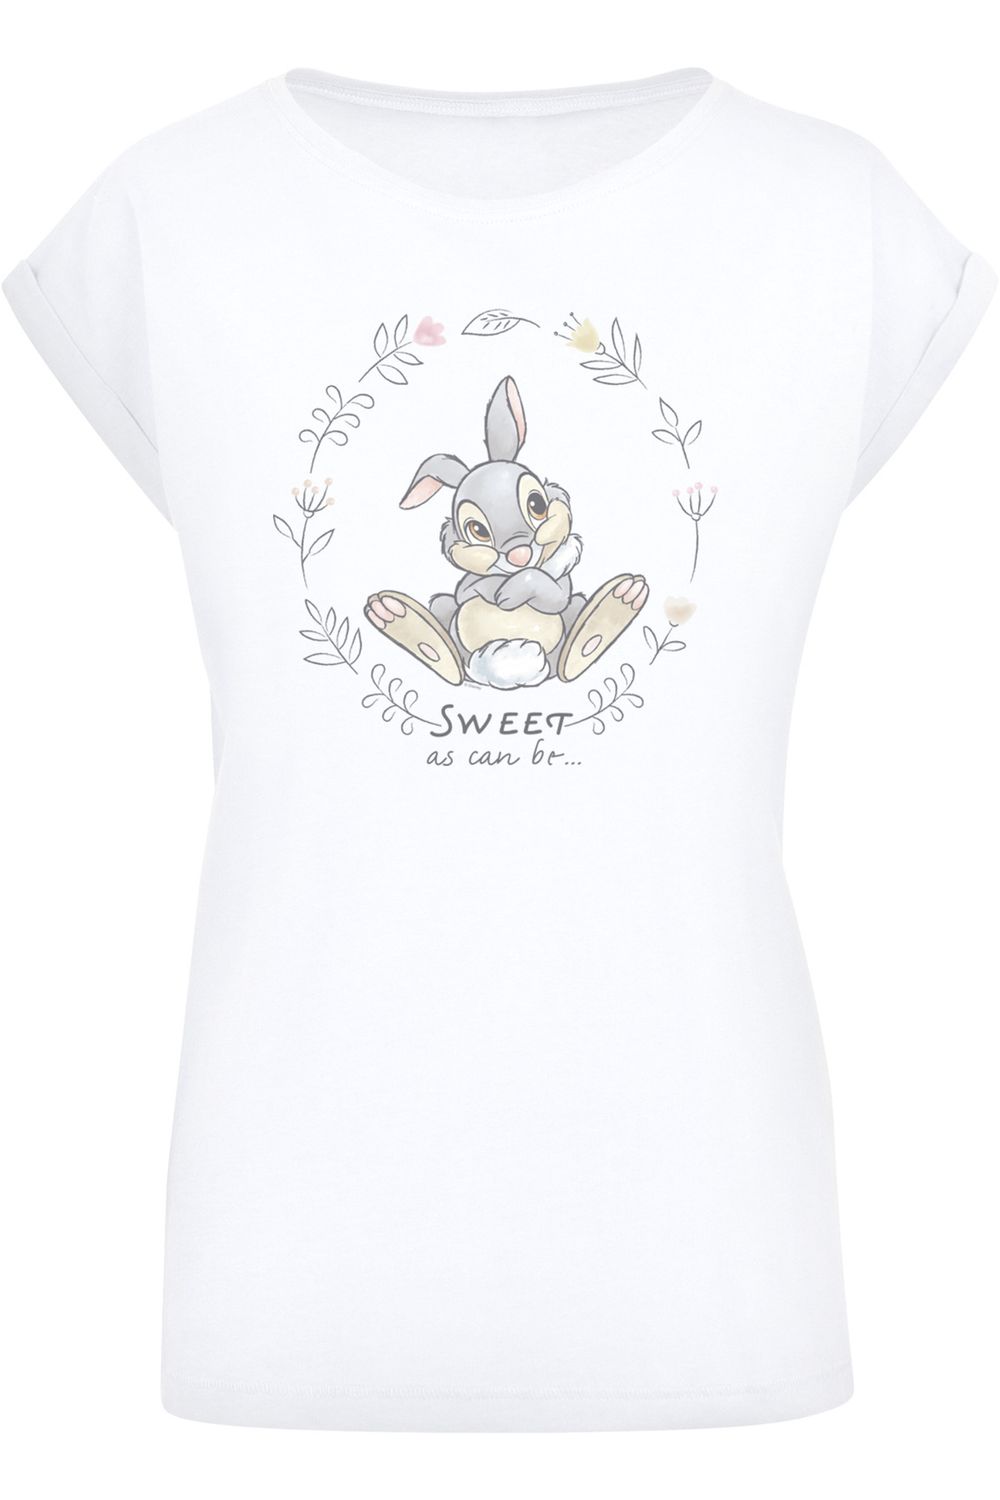 Thumper Bambi - T-Shirt Extended Trendyol Ladies Damen As mit F4NT4STIC Sweet Can Shoulder Be-WHT Disney